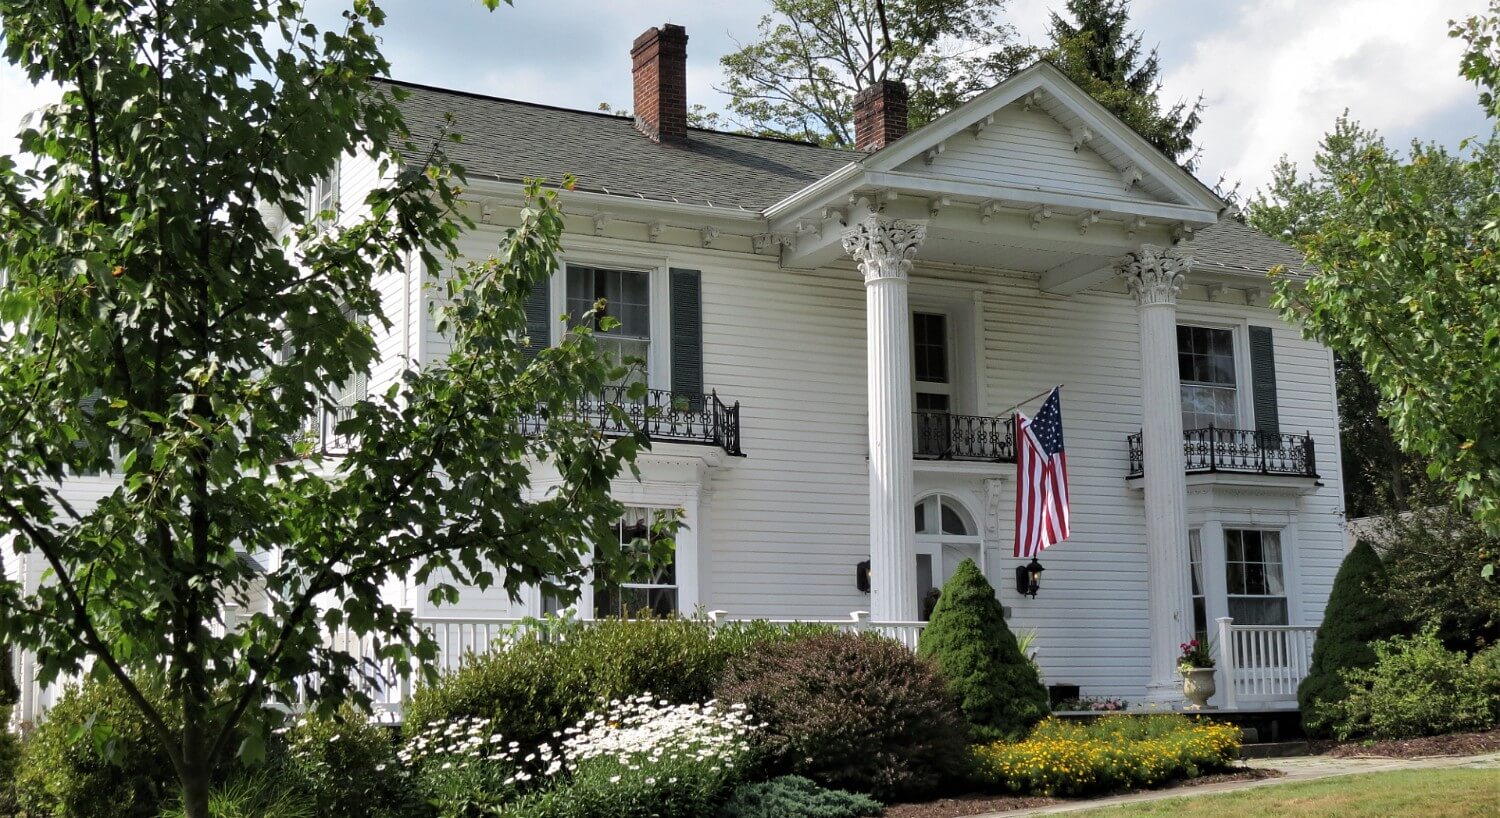 Facade of a large white home with tall pillars and an American flag hanging on the porch